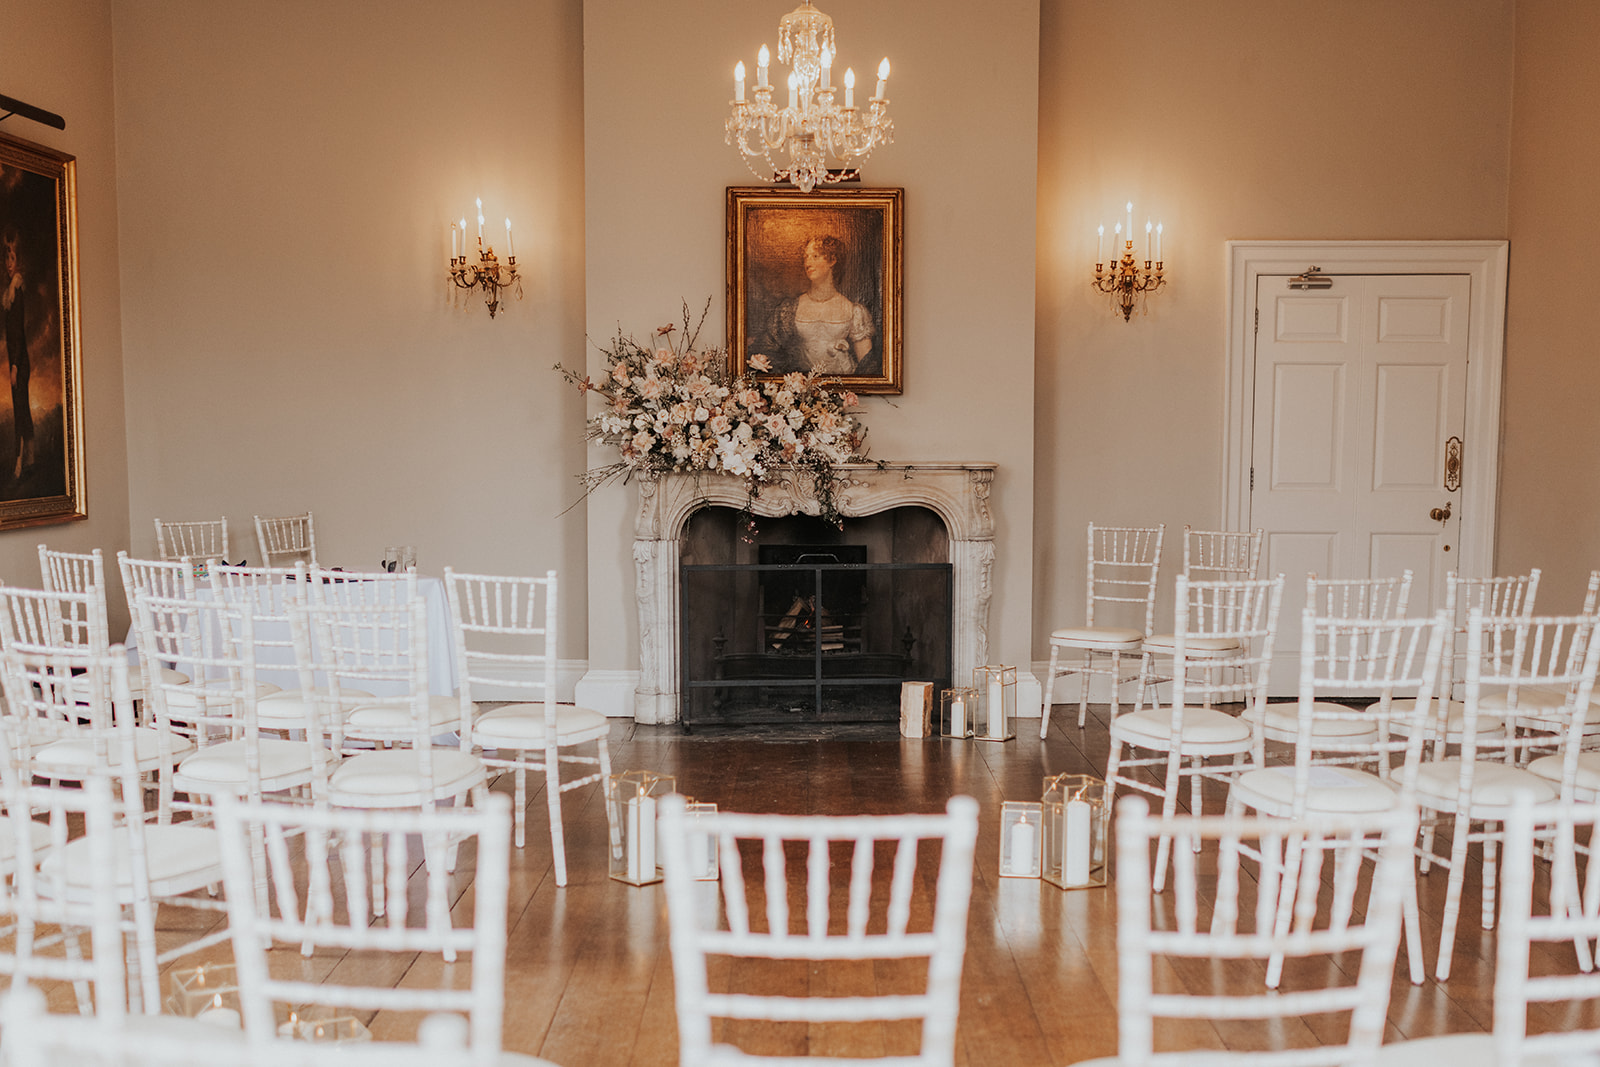 Rows of white wooden chairs are set up for a wedding ceremony in front of an elaborate stone fireplace that has an antique oil portrait of a woman hanging above it.